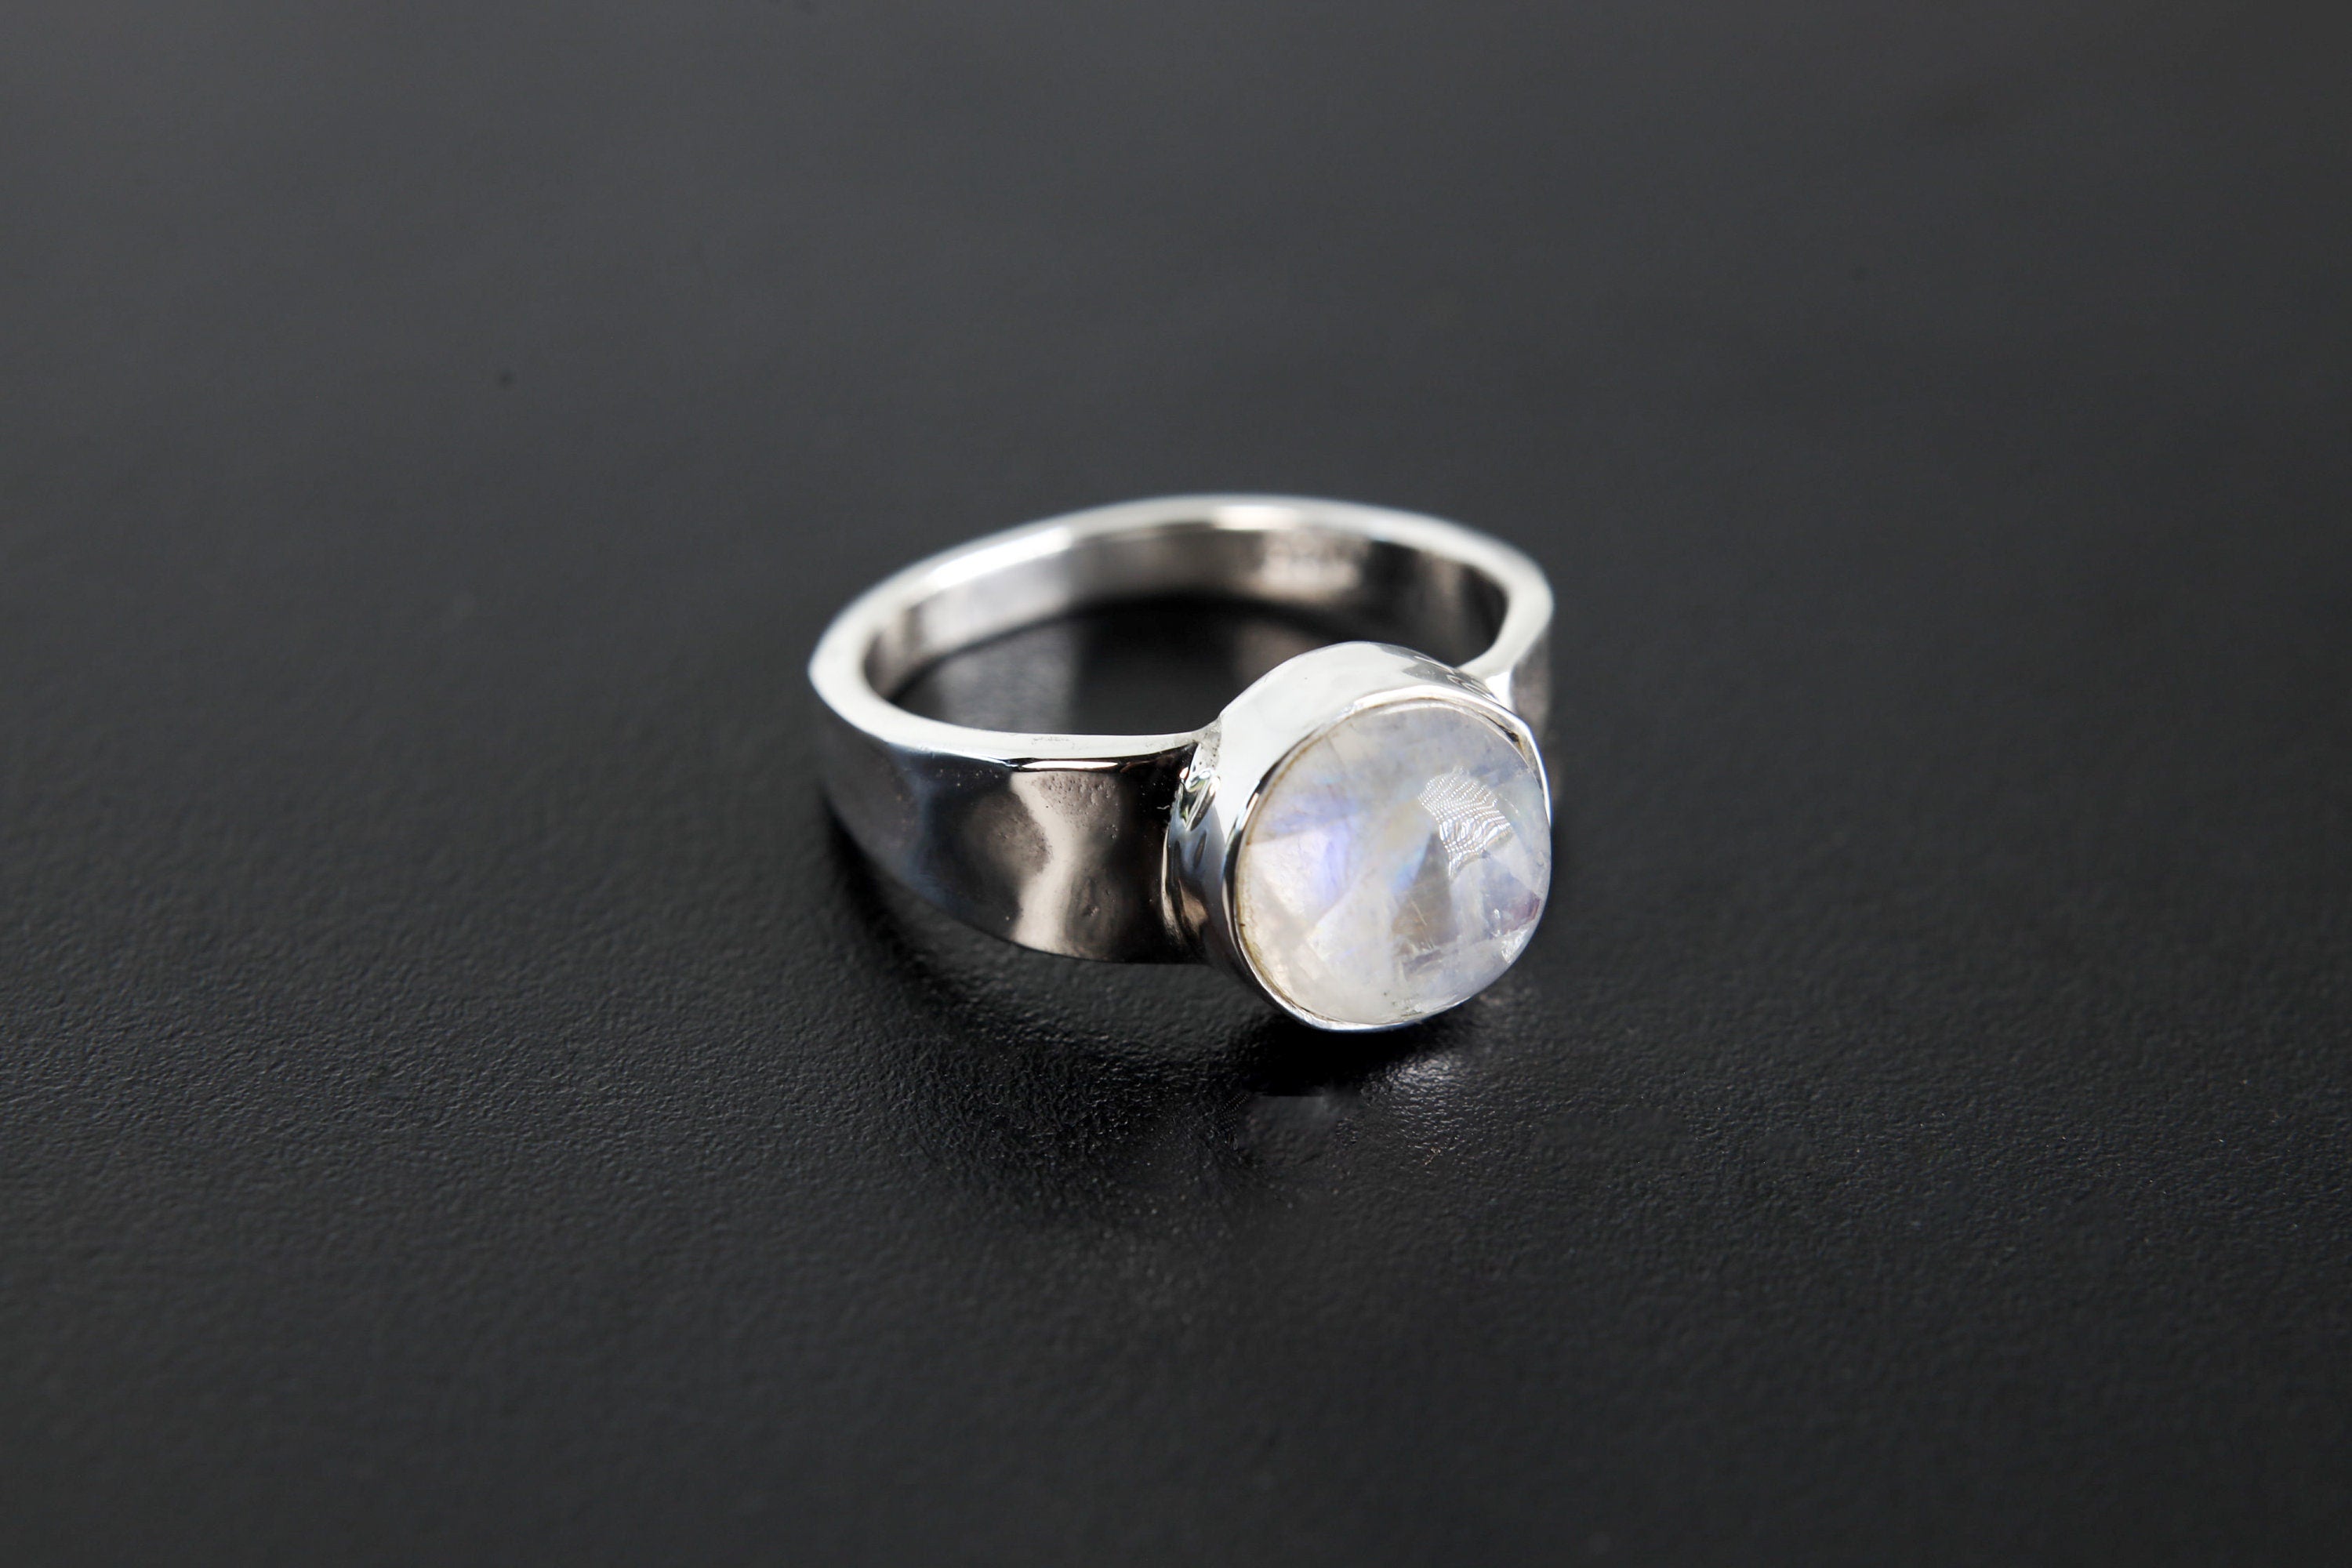 Round Vibrant Blue Moonstone Cabochon - Hammered Ring Band - Unisex - 925 Sterling Silver Setting - High Shine Polish